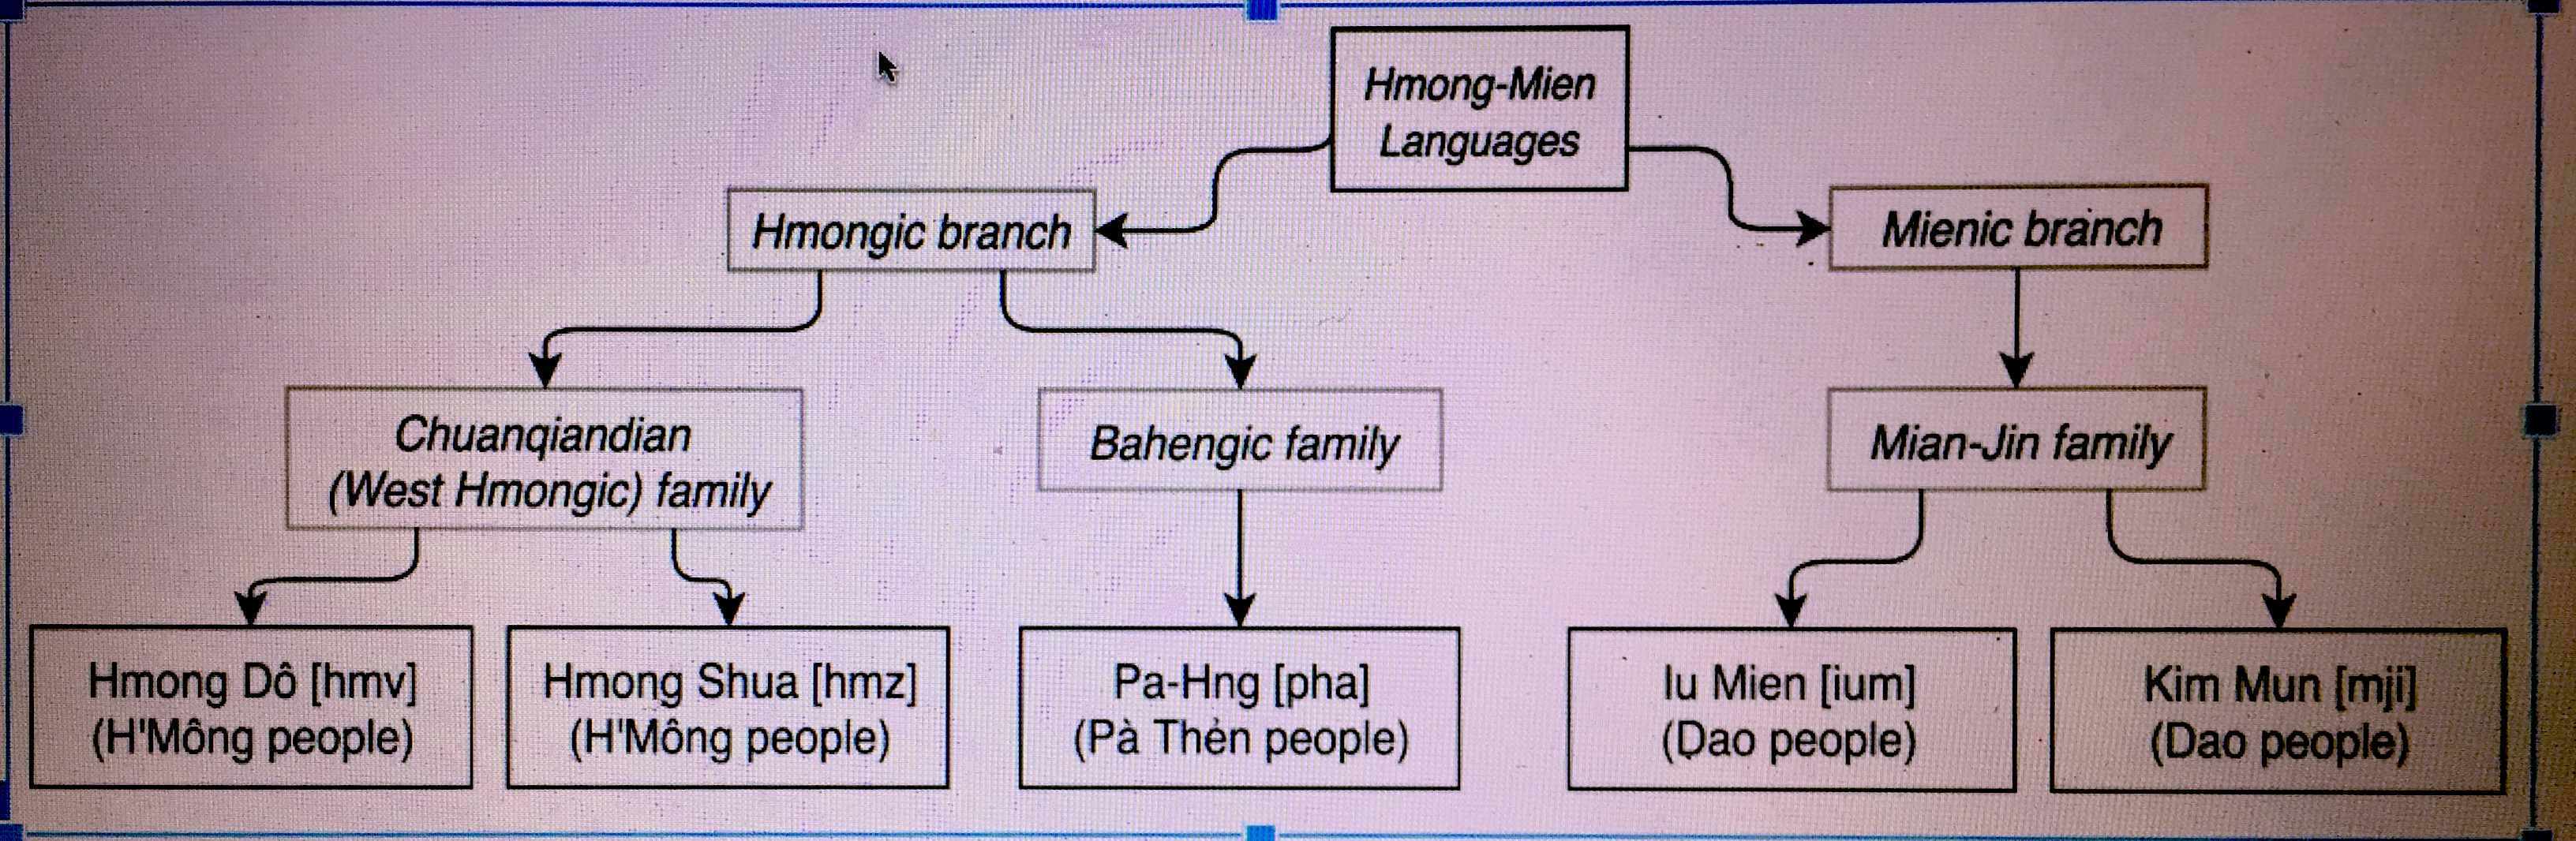 Hmong Languages in Ha Giang